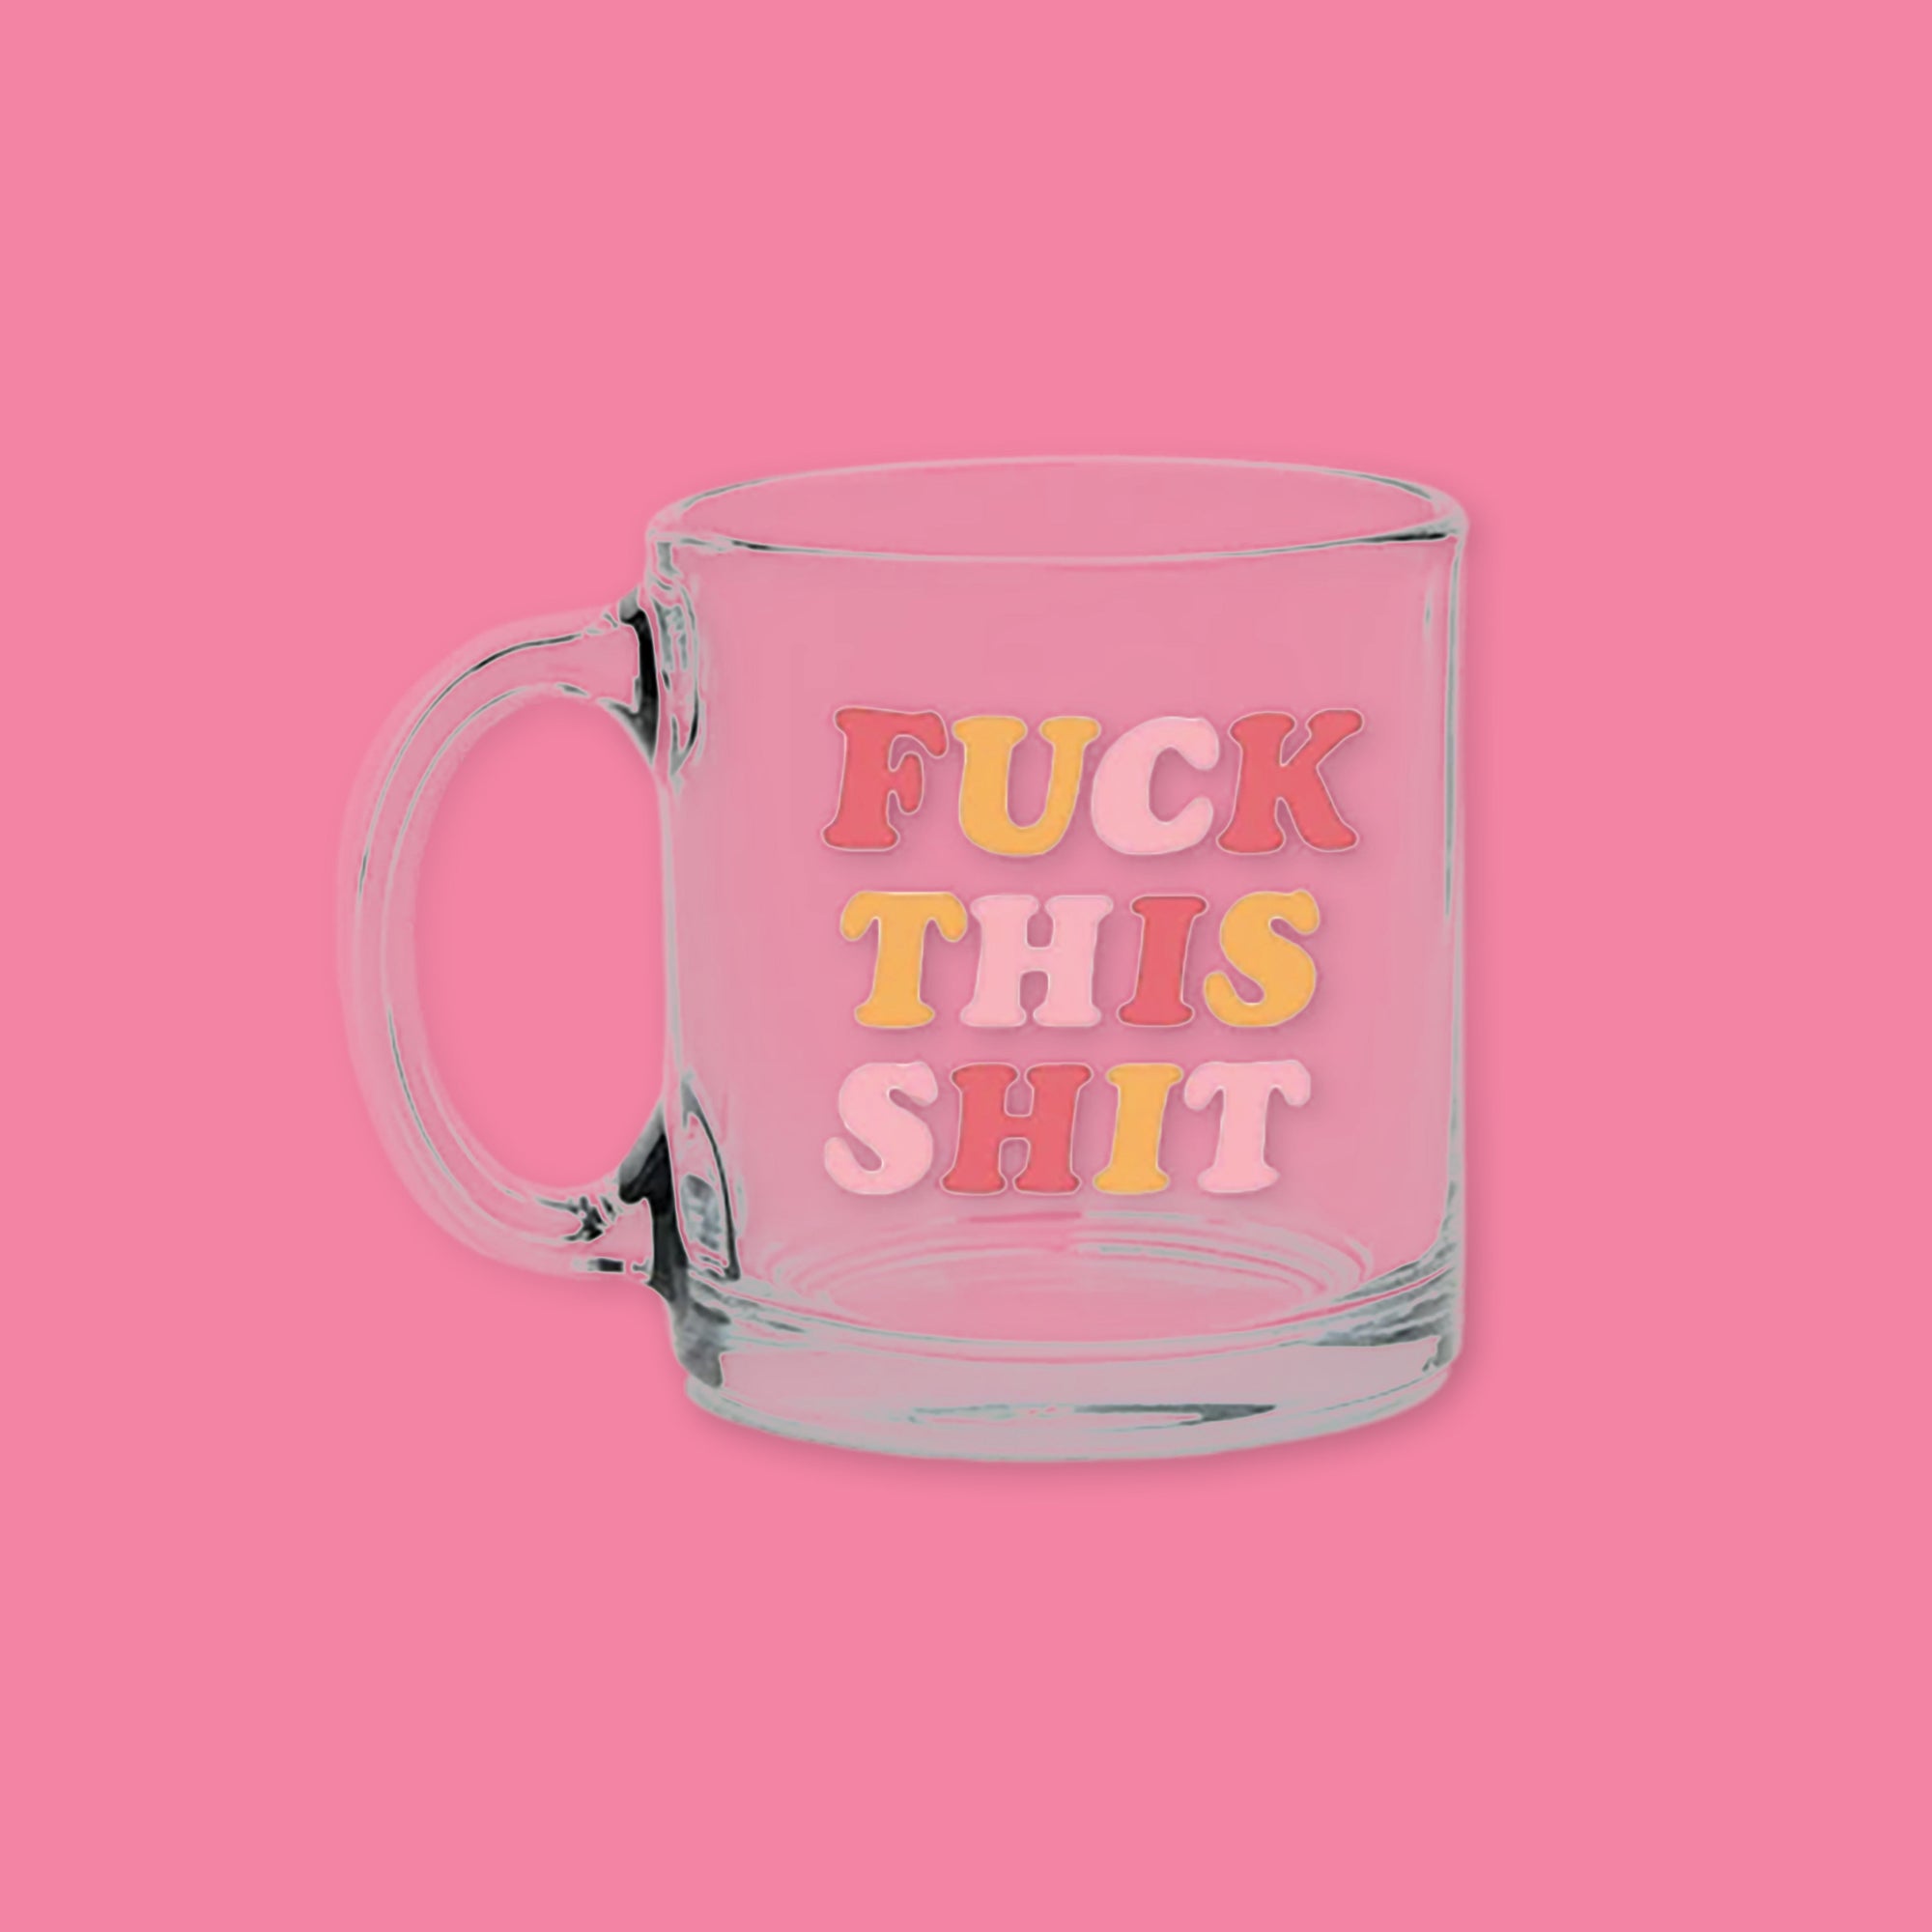 On a bubblegum pink background is a clear glass mug says "FUCK THIS SHIT" in adorable red, yellow and pink cooper-esque font.